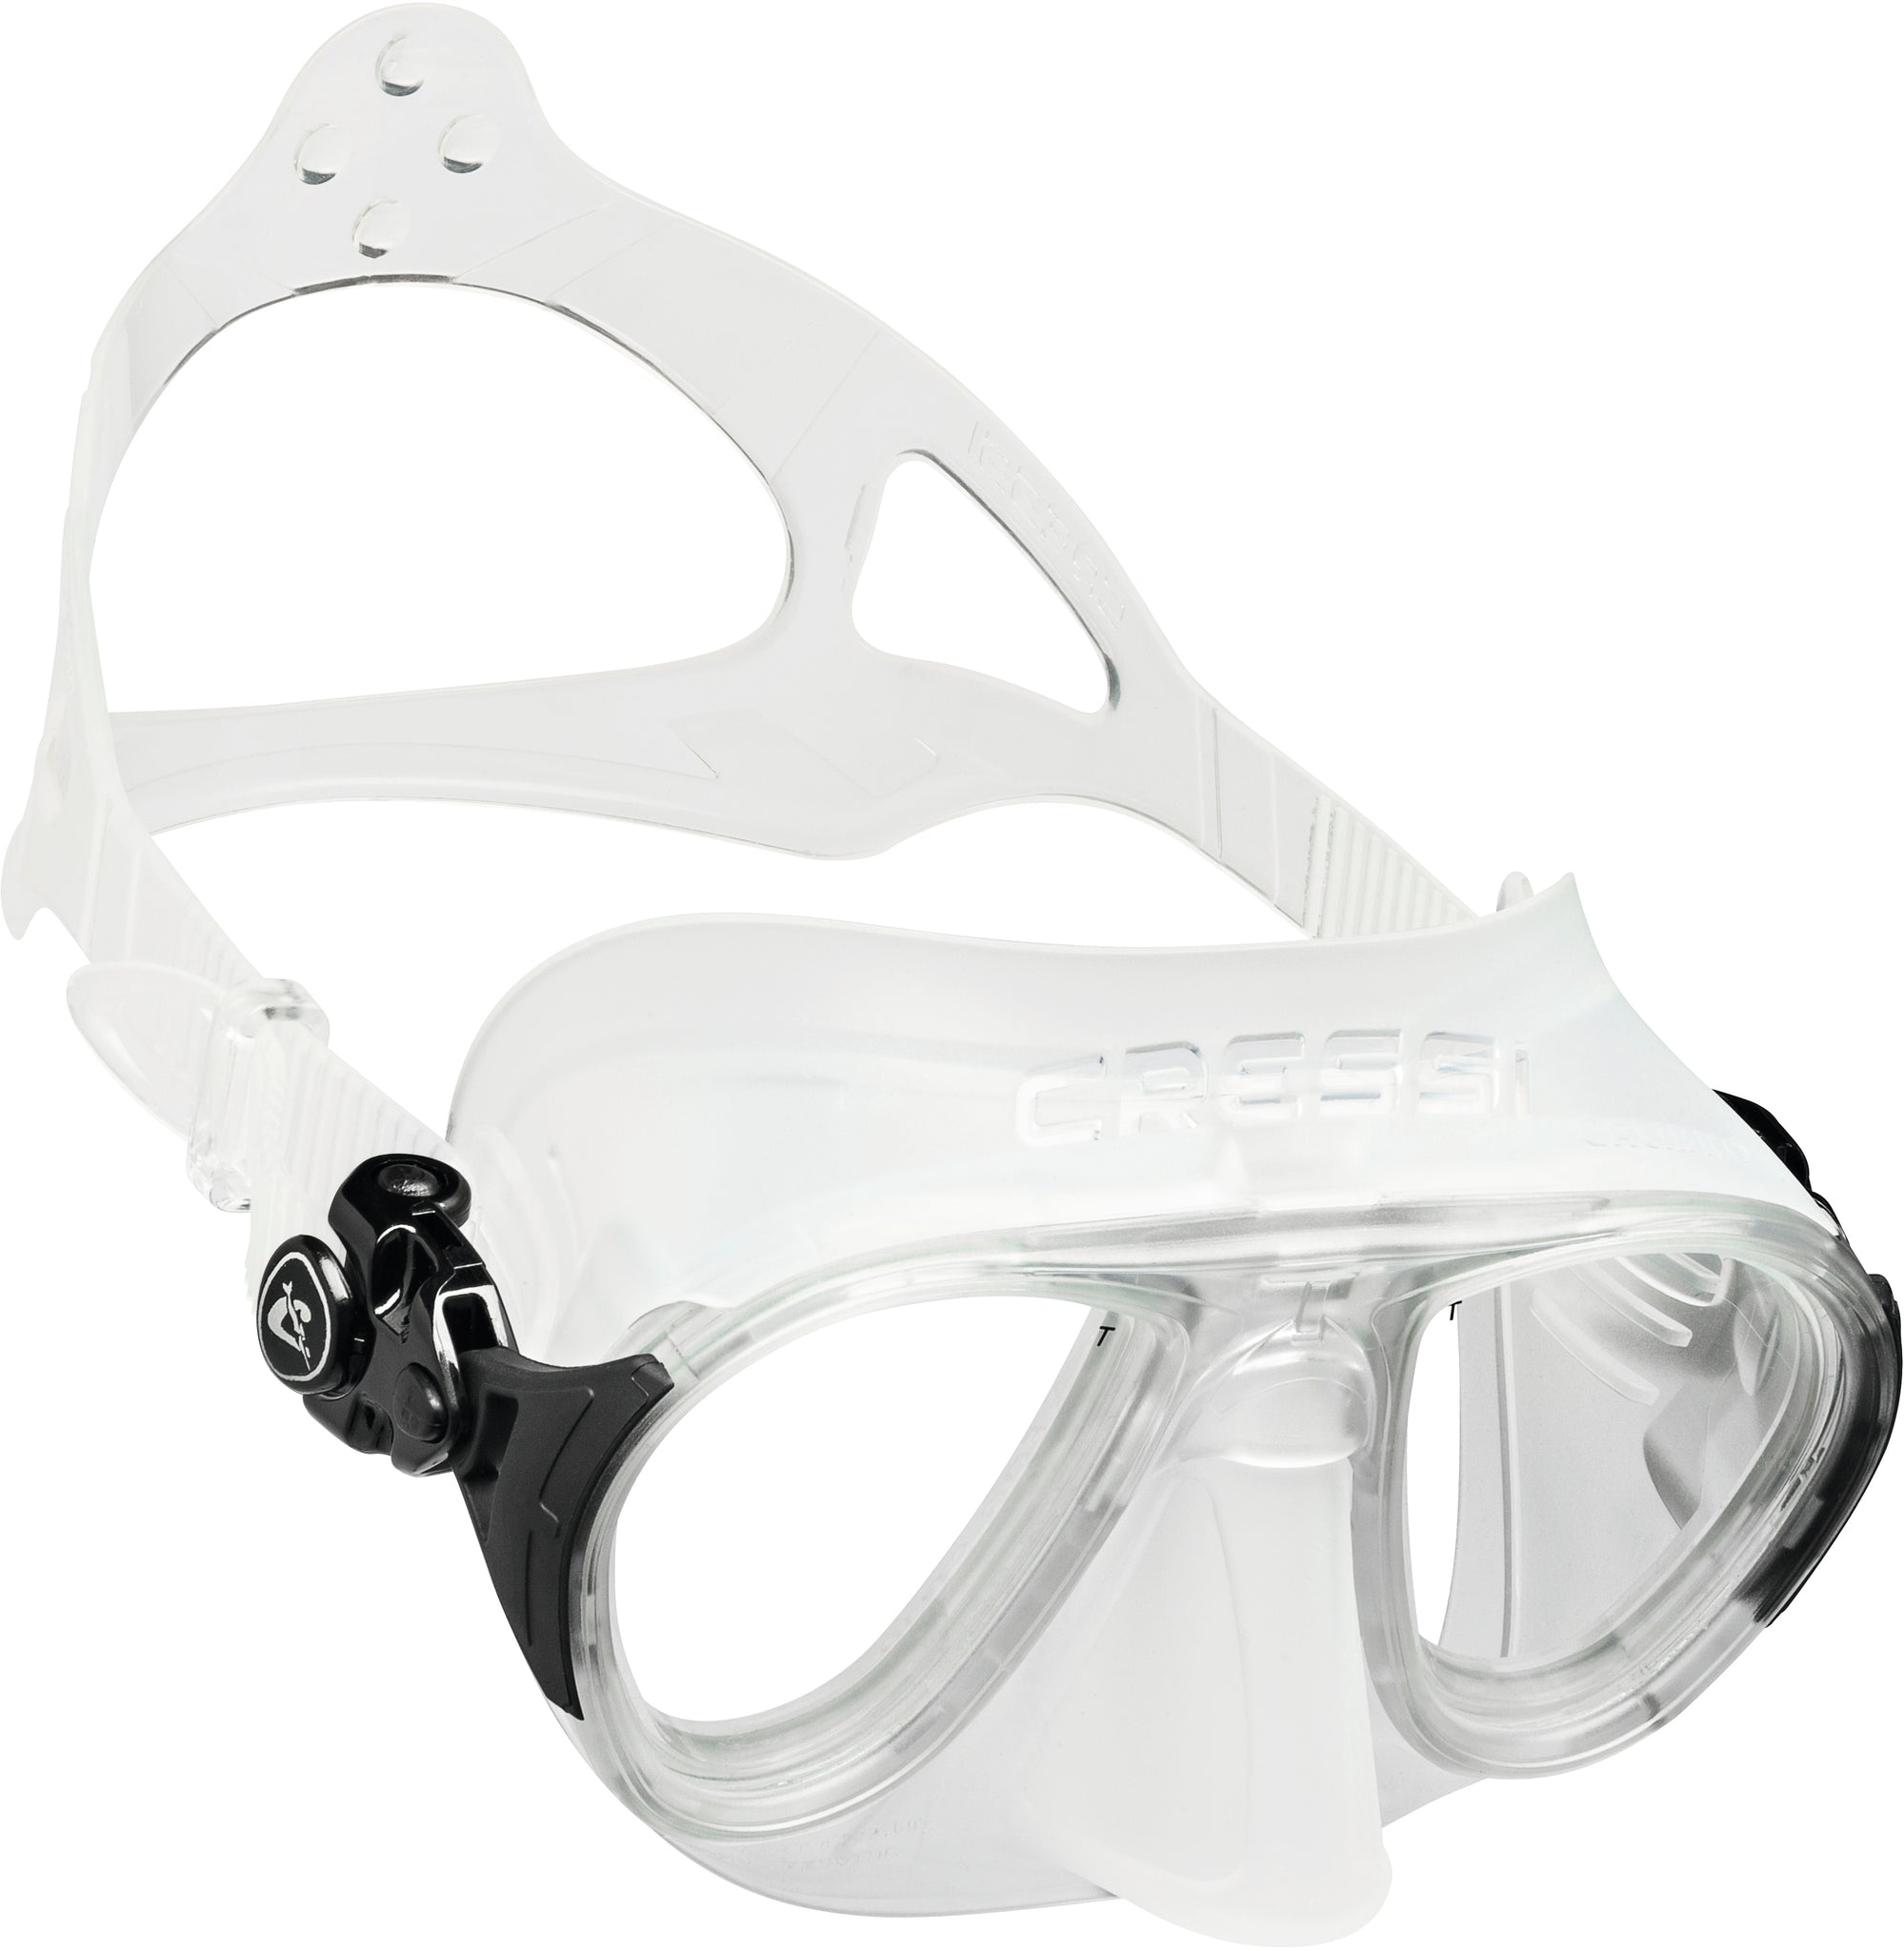 Cressi Dive Mask Calibro: Integrated Buckles for Secure Fit